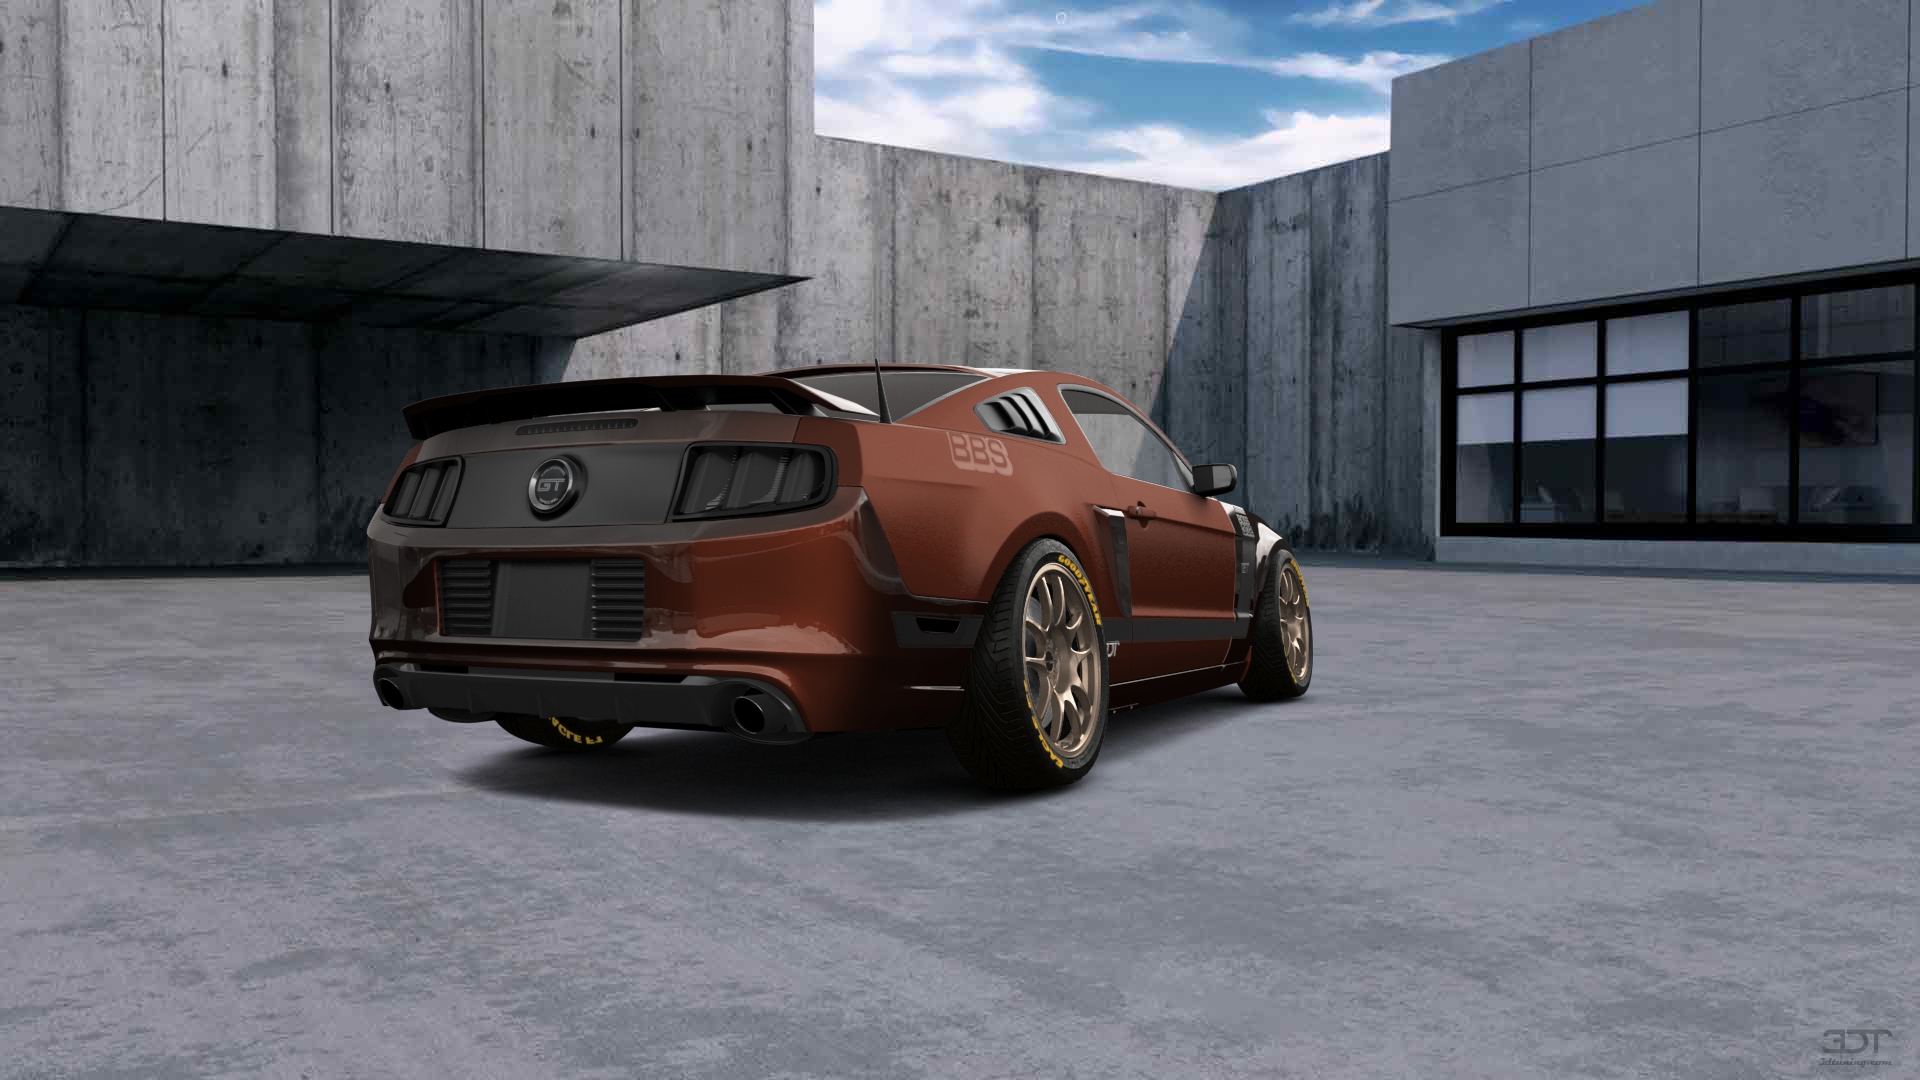 Ford Mustang challenge 2 Door Coupe 4013 tuning